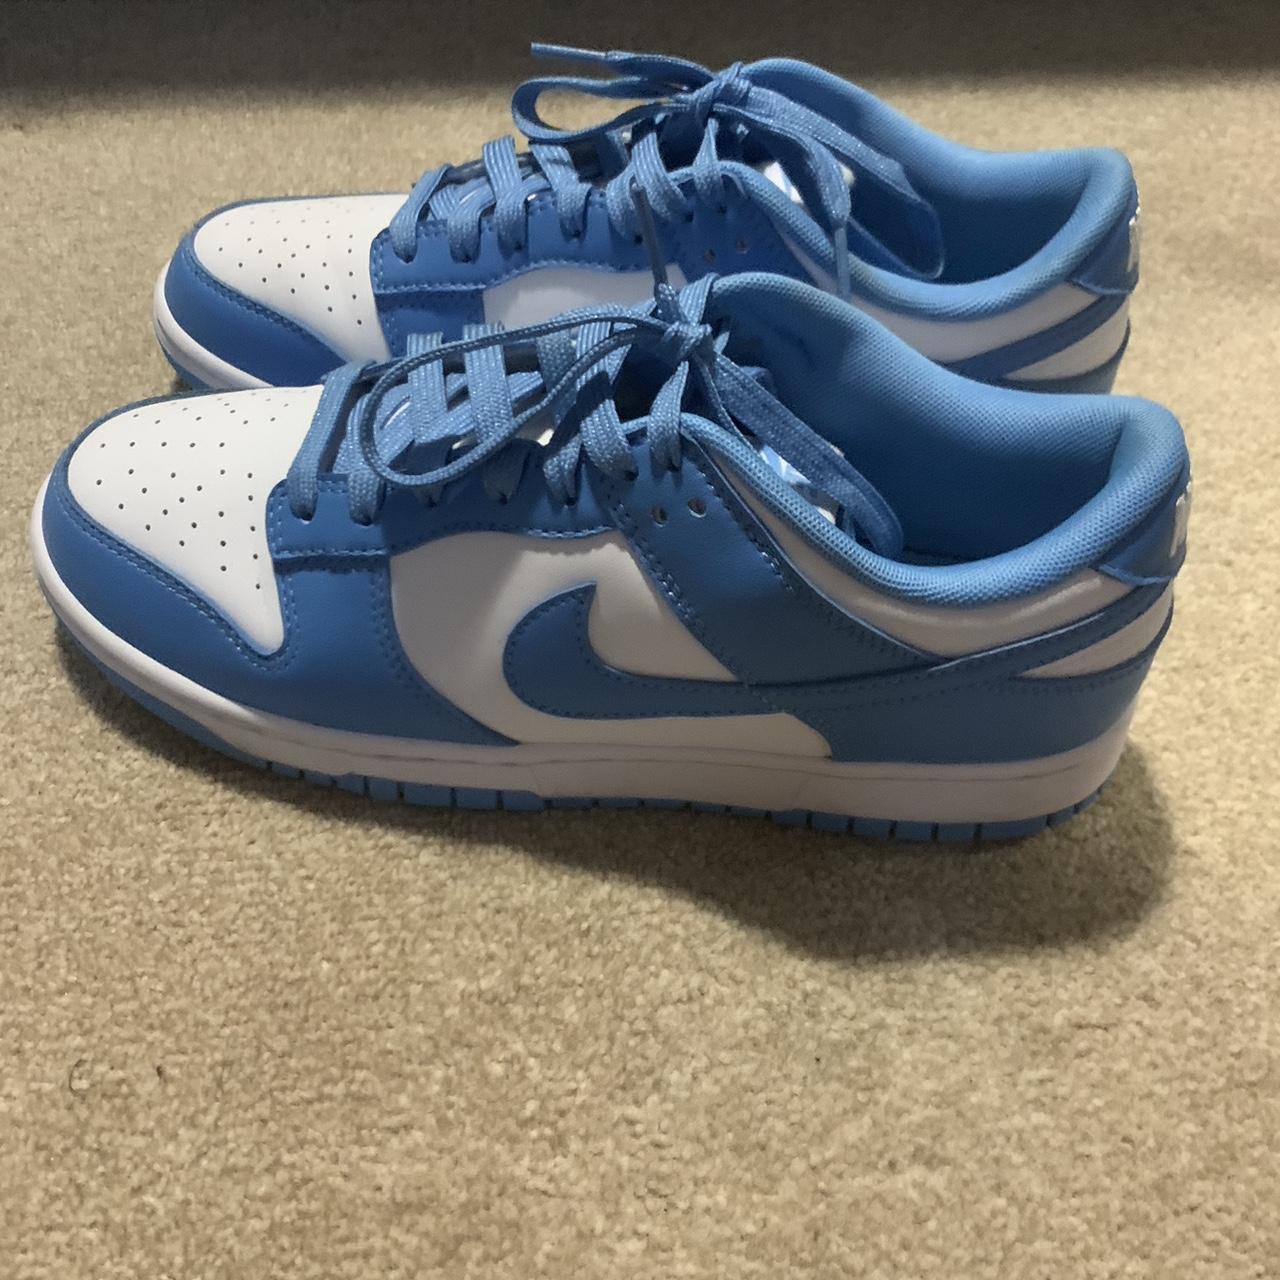 Nike Men's Blue and White Trainers | Depop